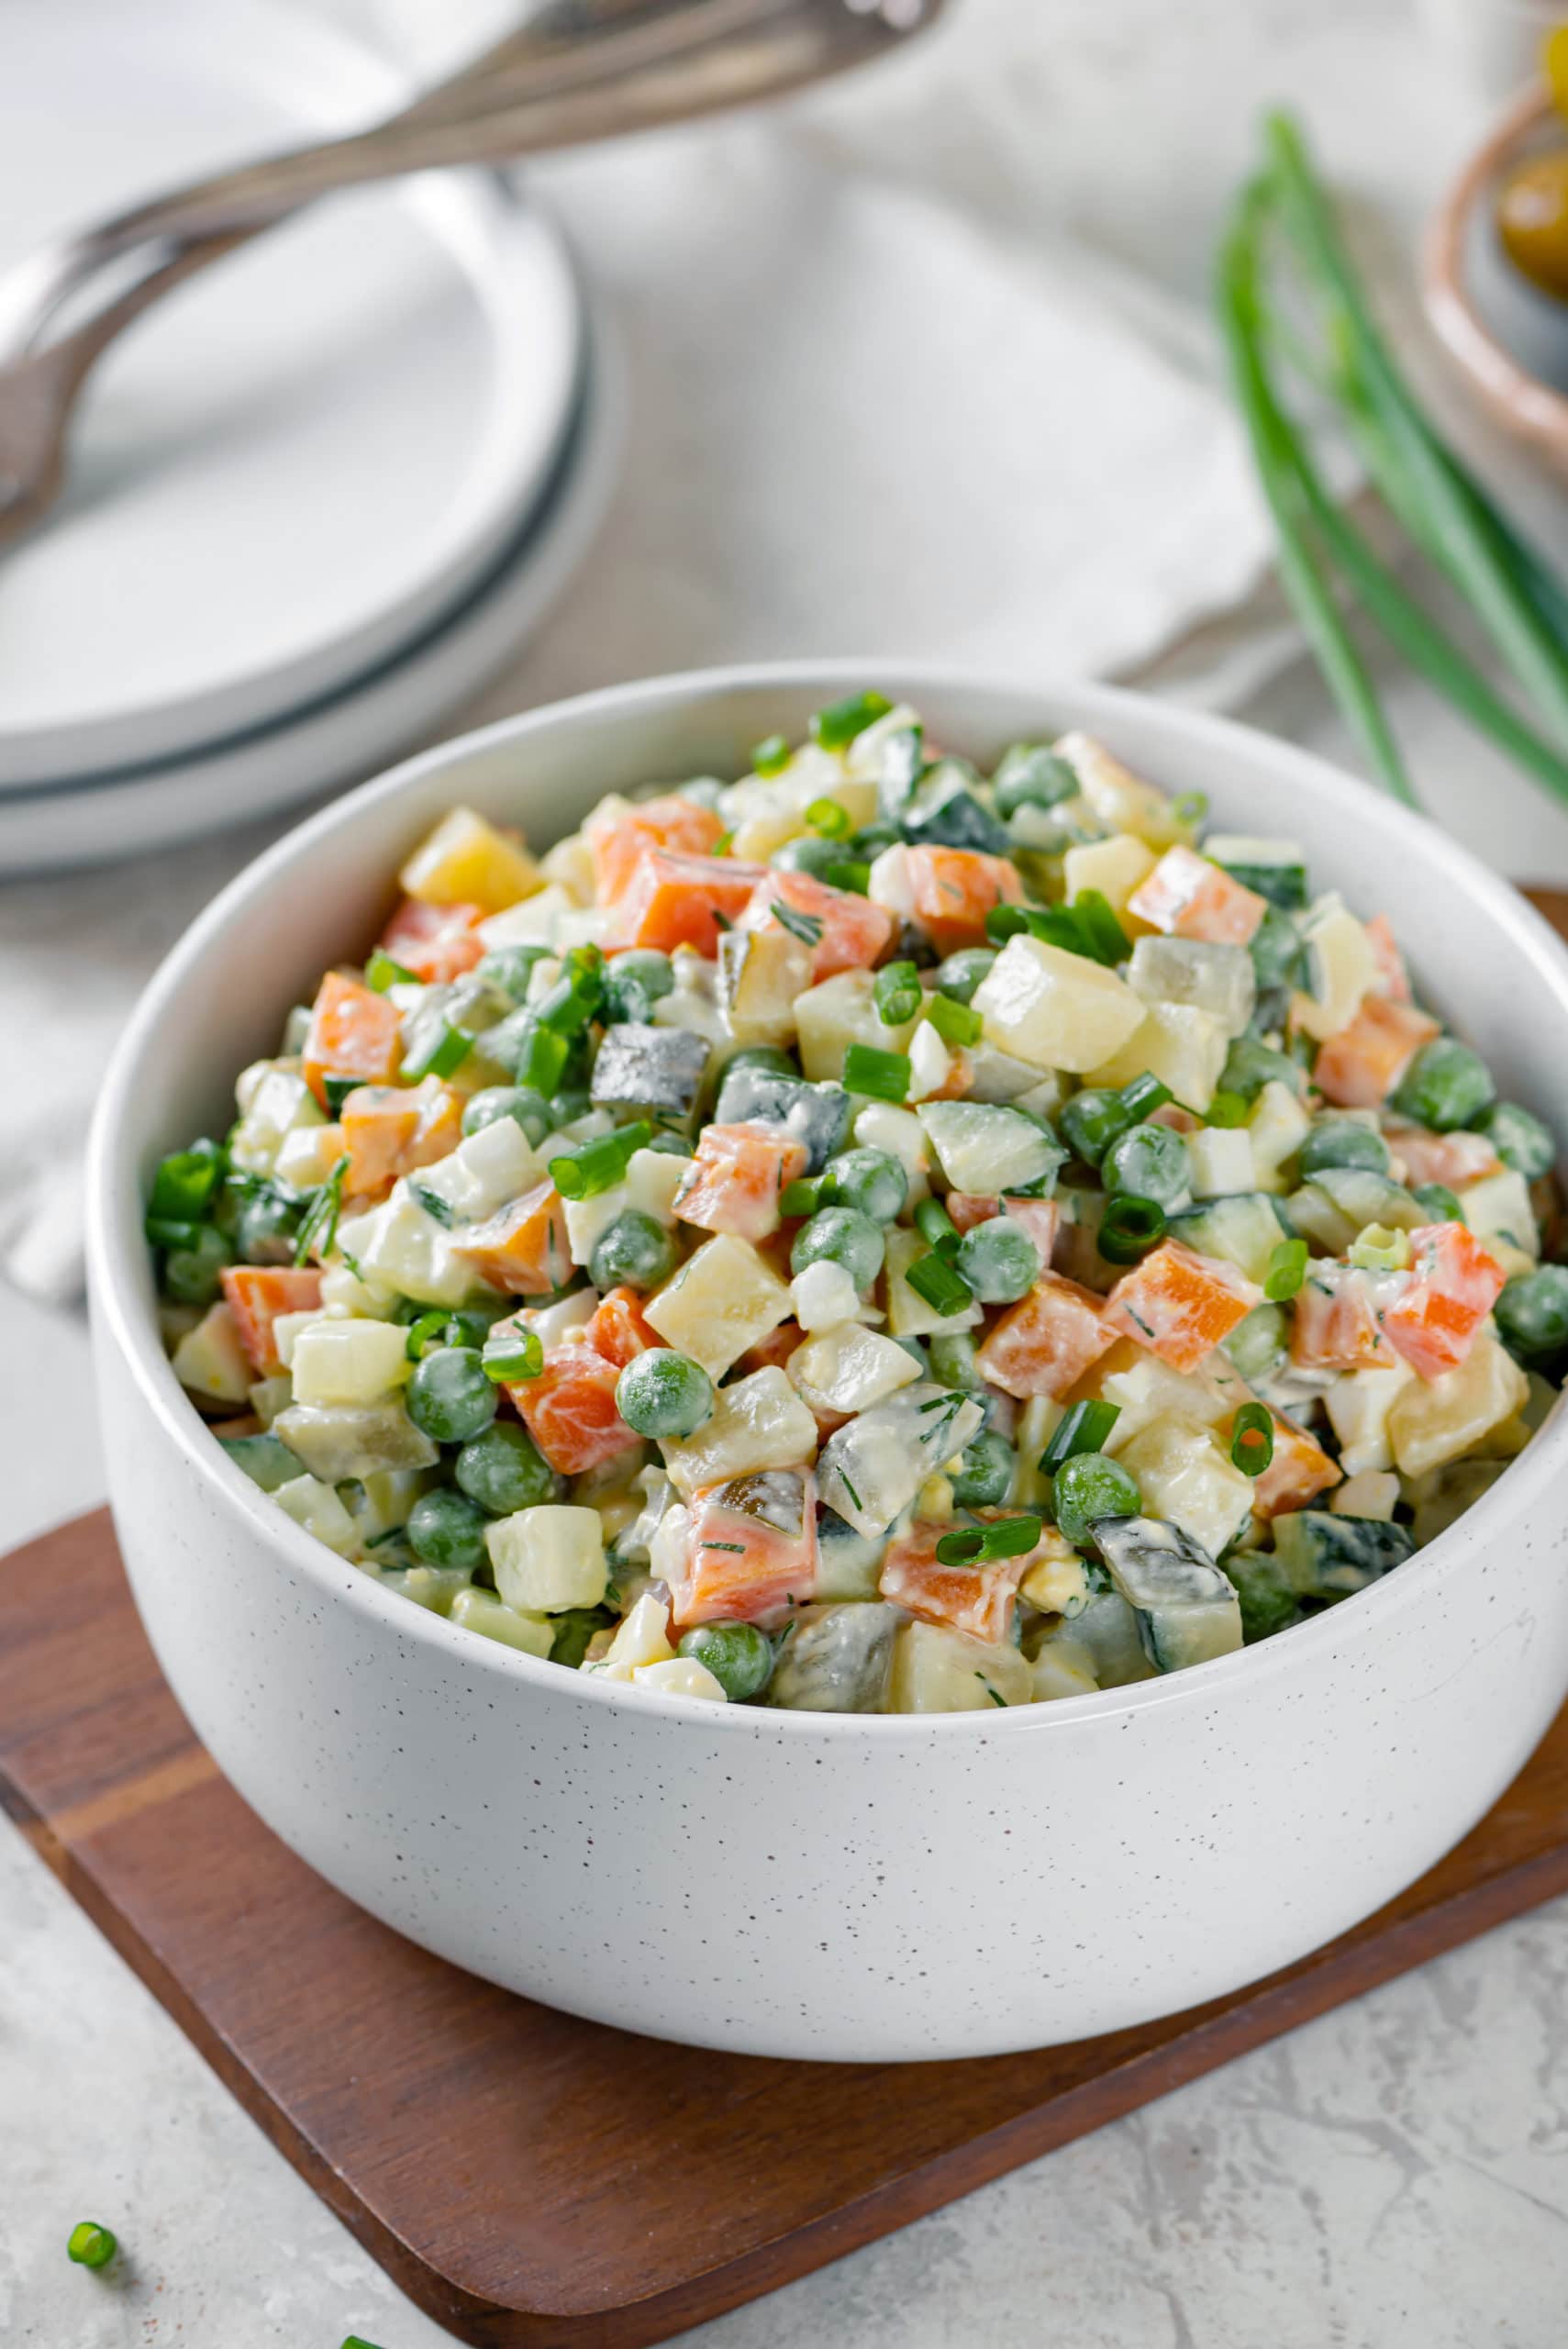 Simple and Classic Olivier Salad